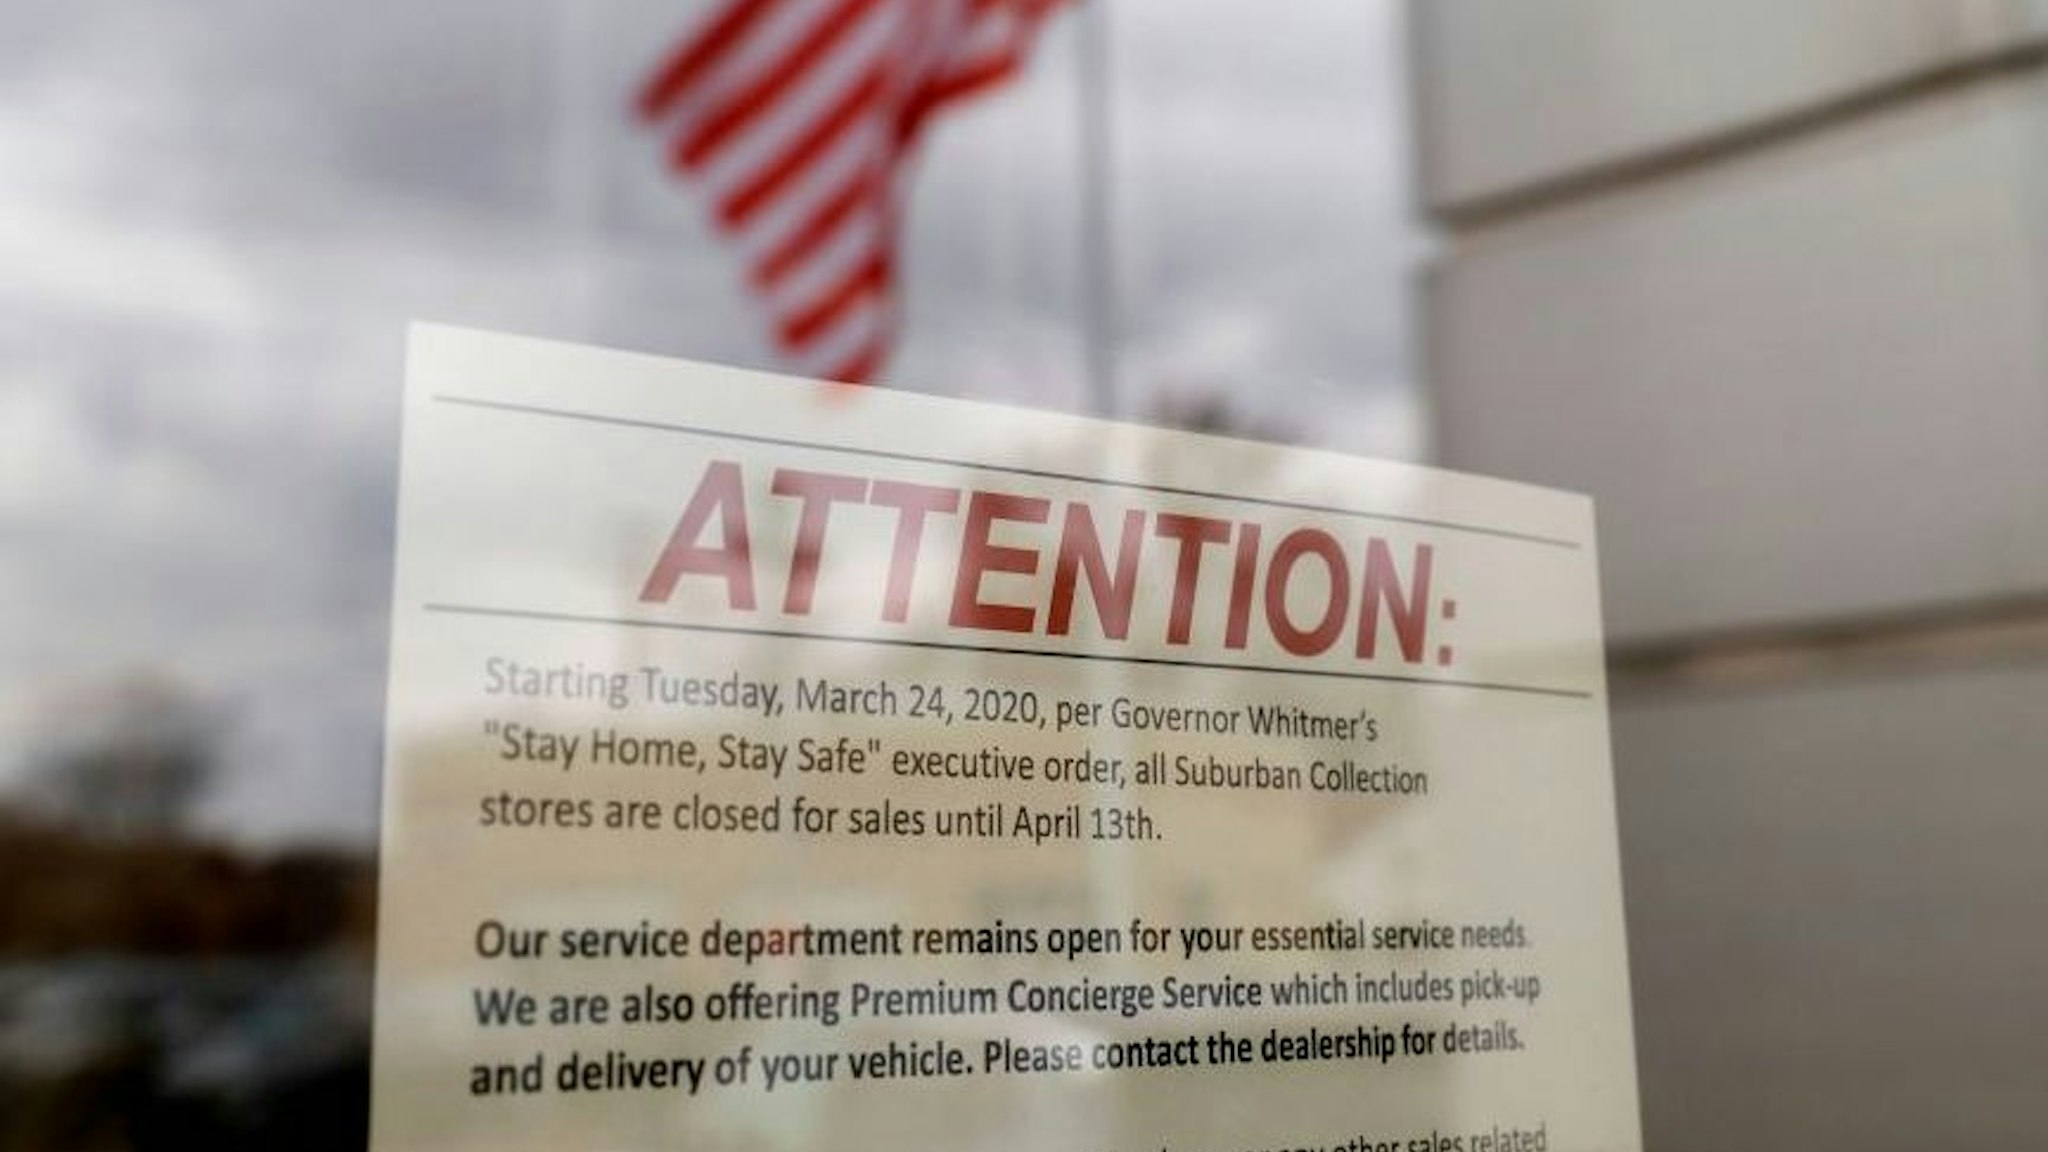 A closed sign is seen on the Suburban Buick GMC that is currently closed by Michigan Governor Gretchen Whitmer to stop the spread of coronavirus,COVID-19, in Ferndale, Michigan on March 26, 2020. - President Donald Trump, keen for an early lifting of economically costly social distancing measures against the coronavirus, said he would propose dividing the United States by risk levels. In a letter to state governors released by the White House, Trump said that better testing now allows the mapping of virus threat on a local level. (Photo by JEFF KOWALSKY / AFP)